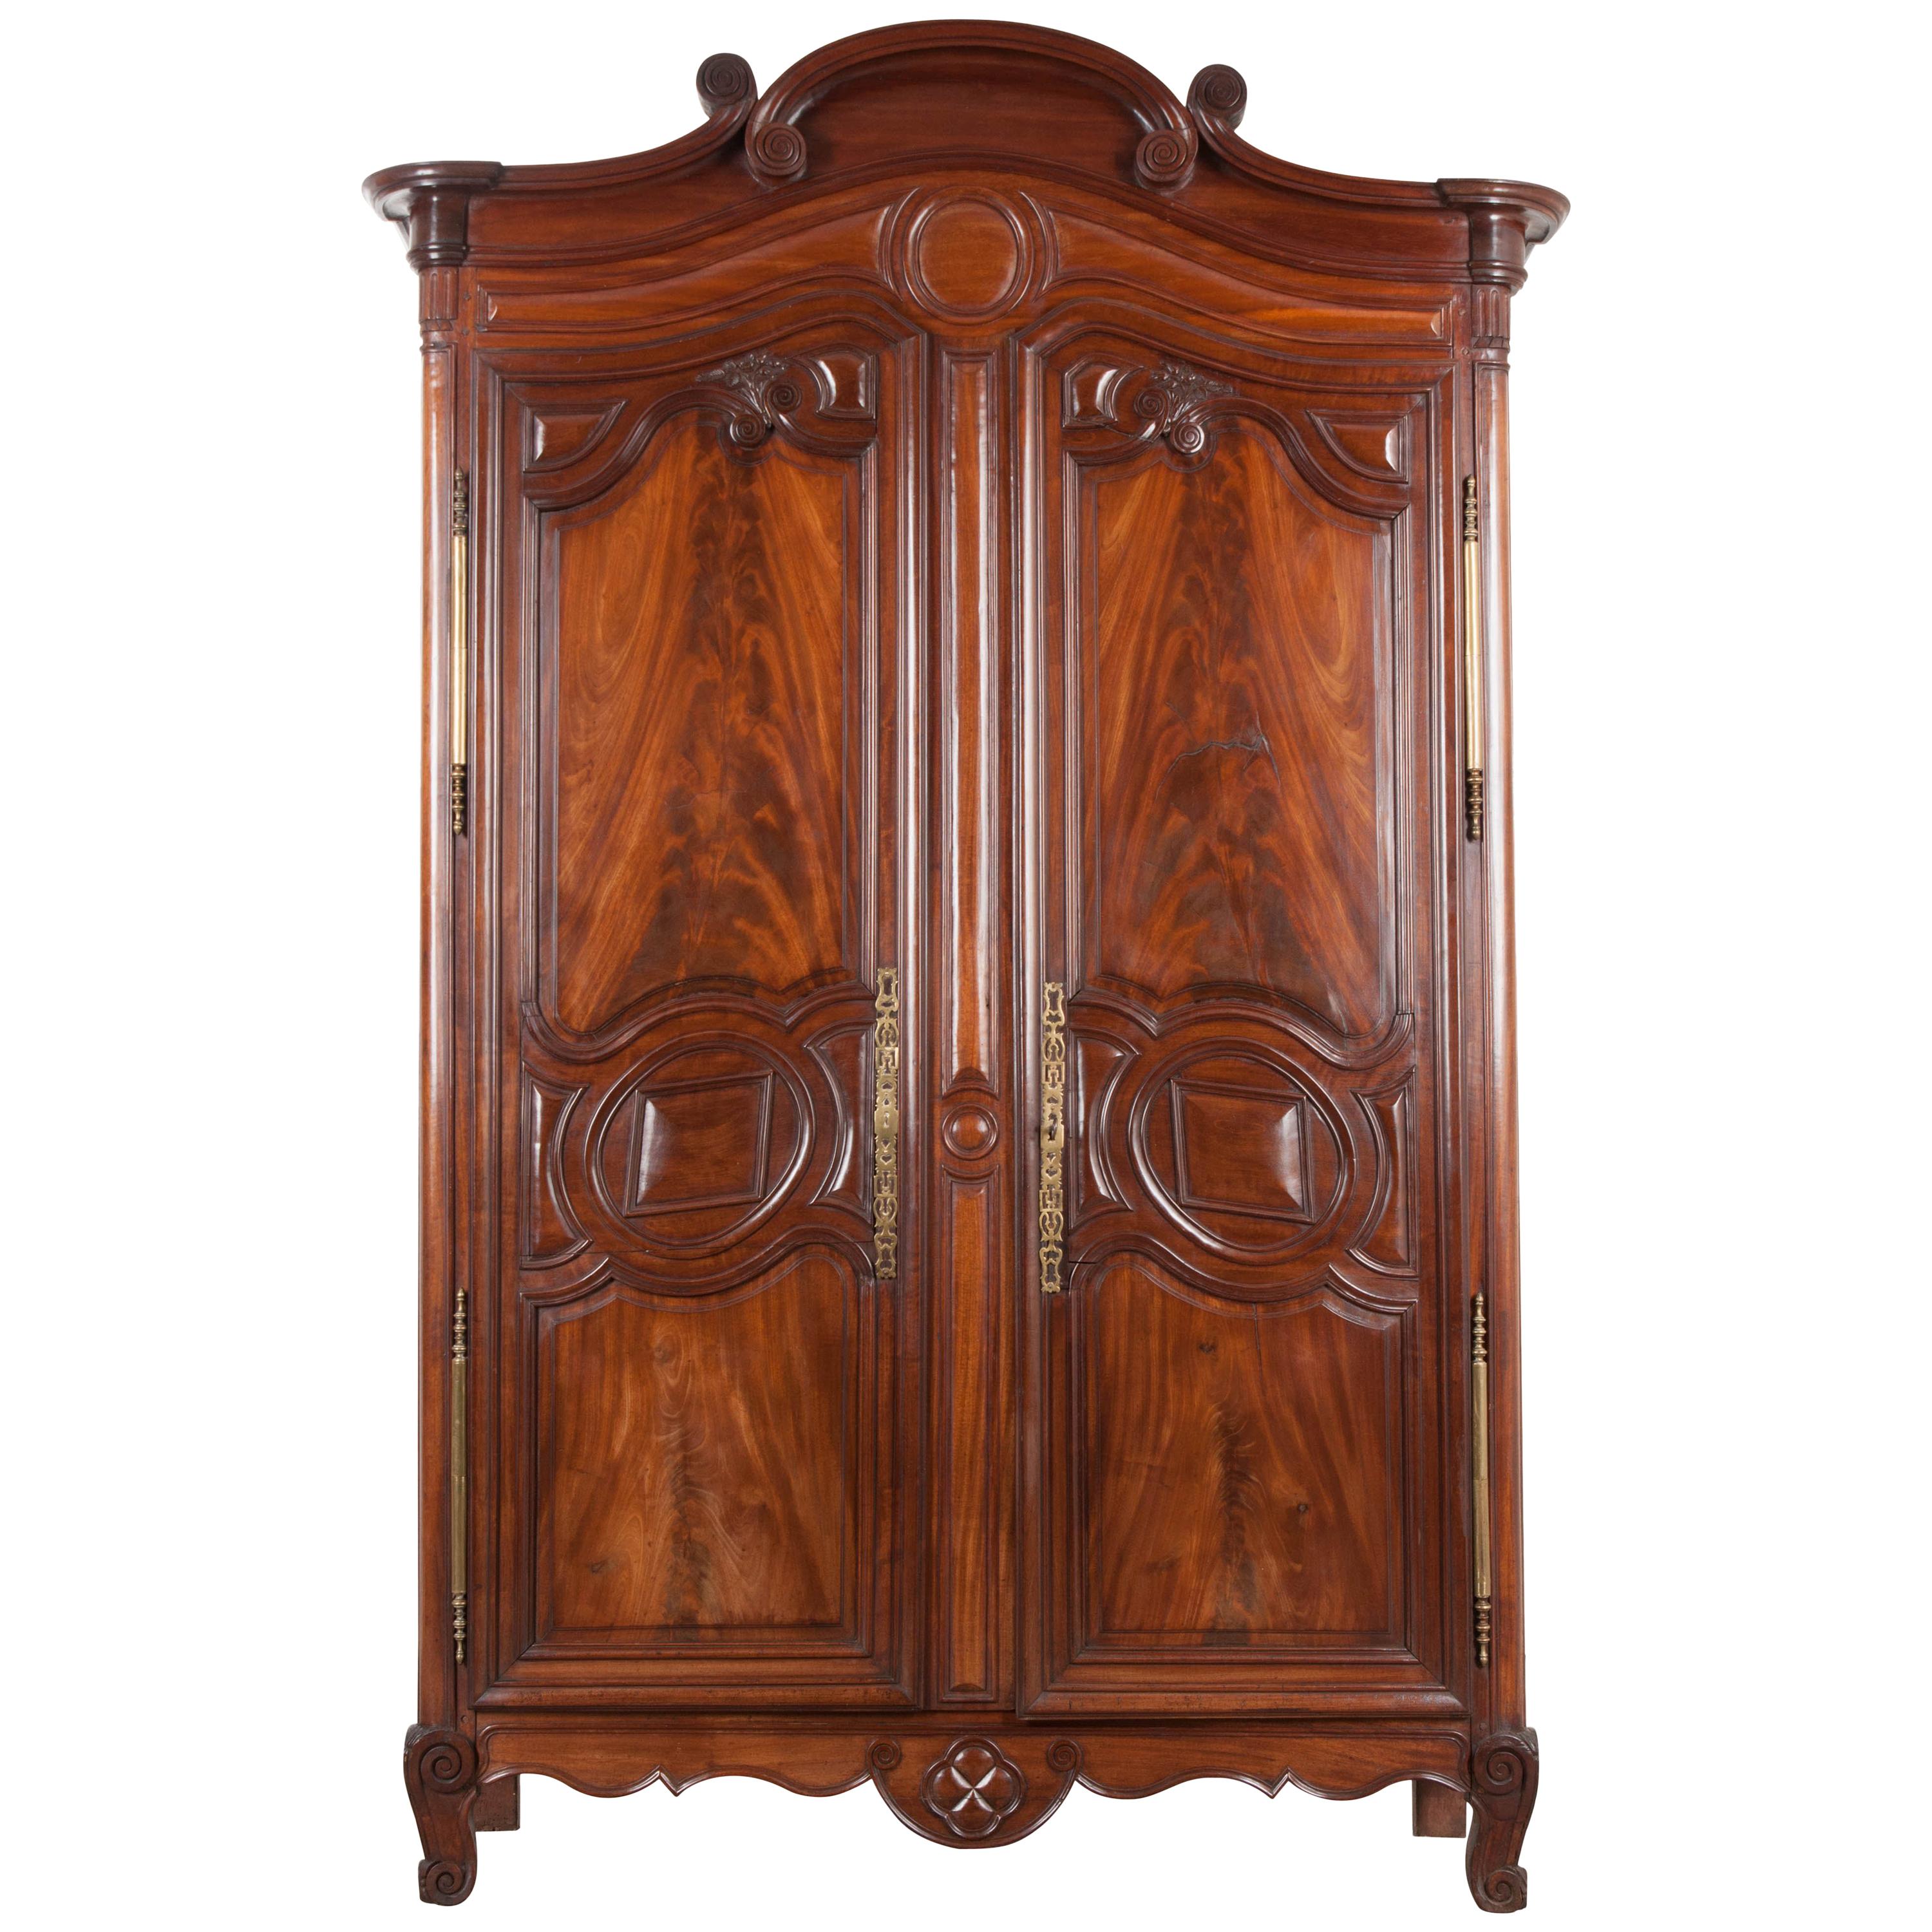 Mahogany Armoire on Sale, SAVE 57%.